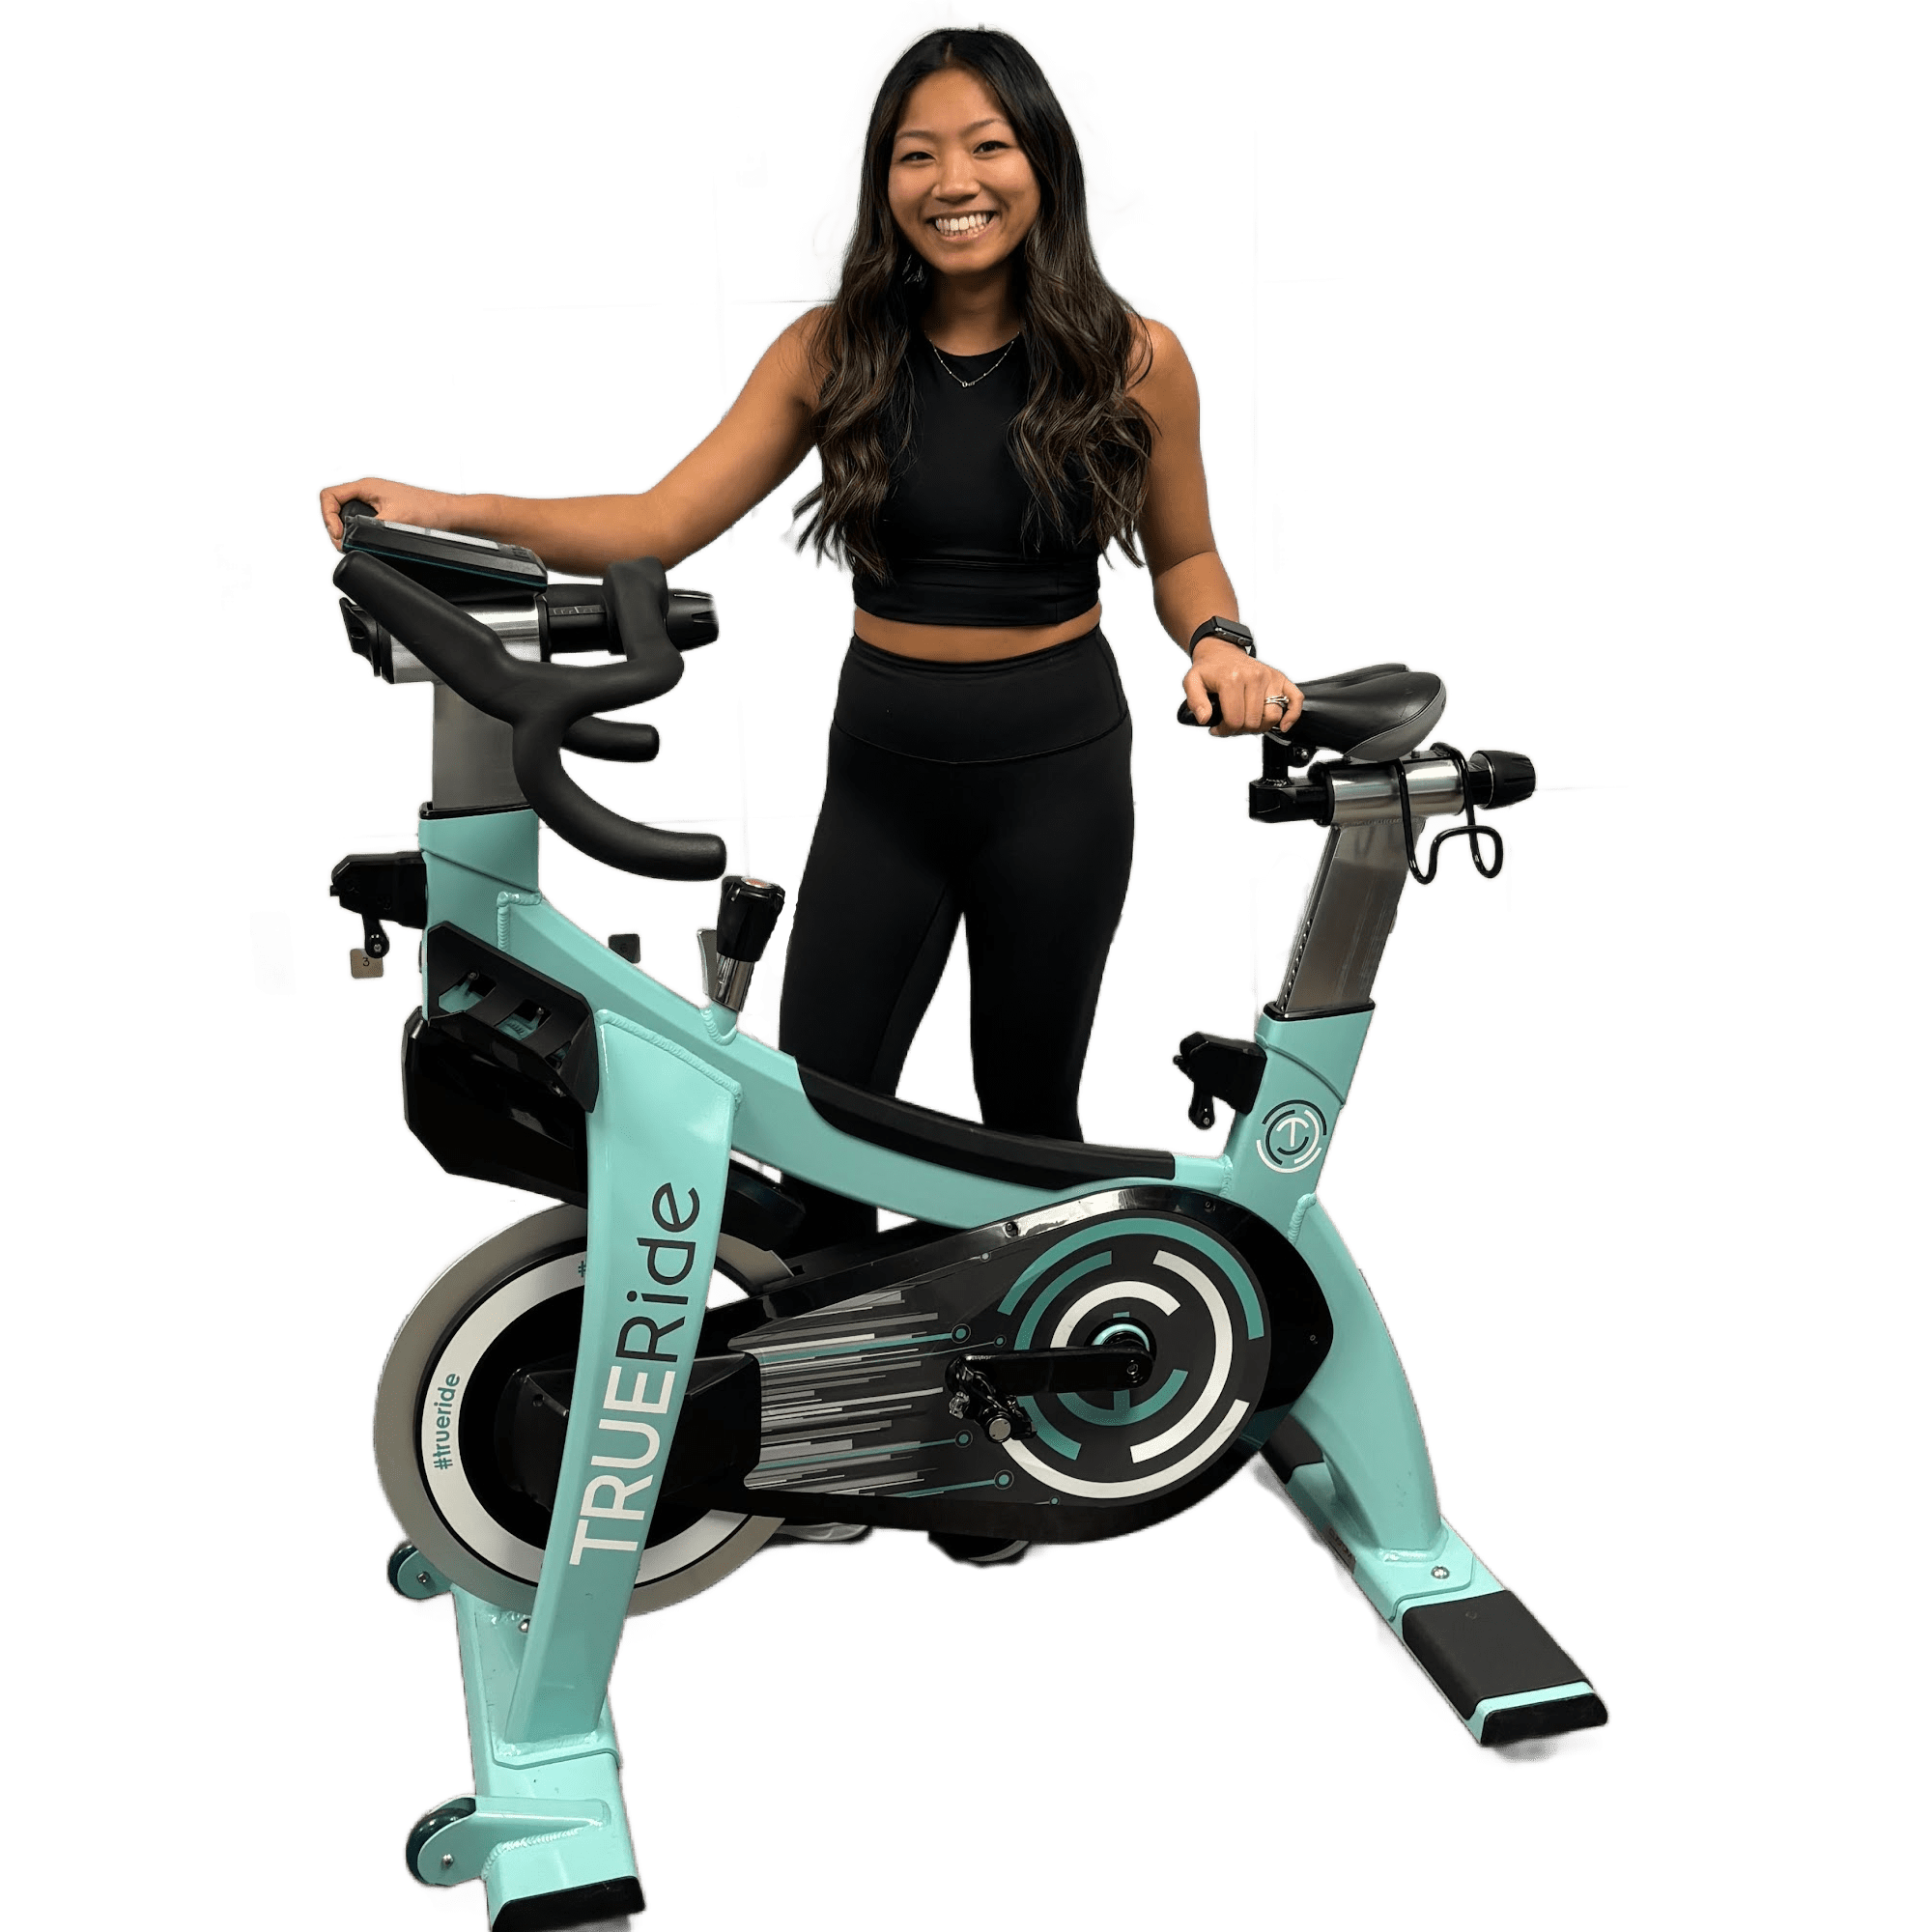 Cycle Instructor | True Ride Indoor Cycling